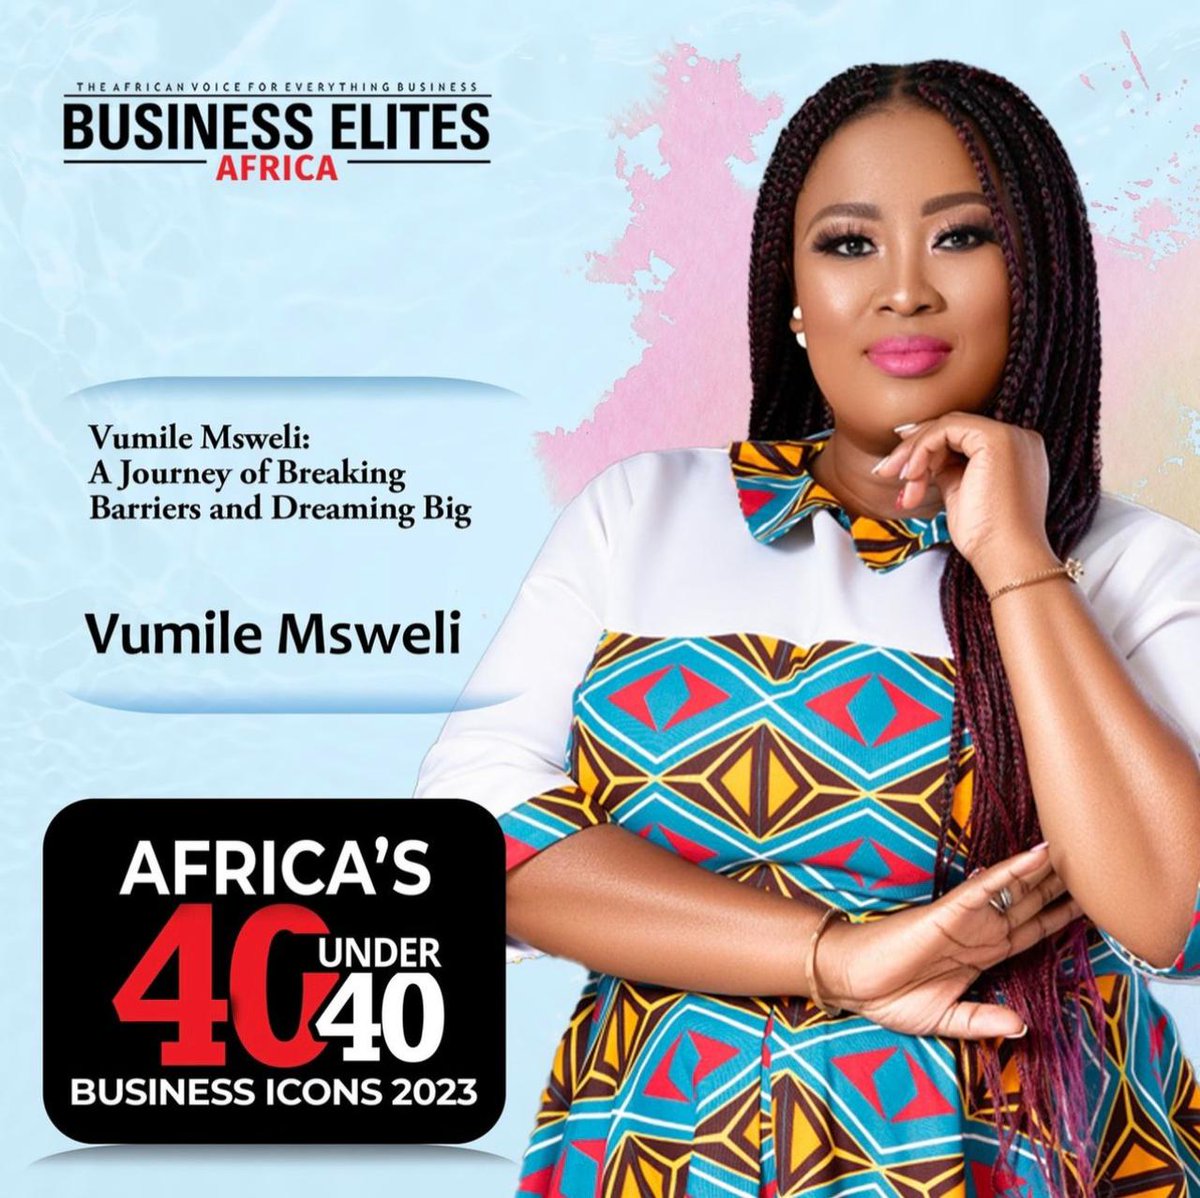 thrilled and grateful to be recognized as one of Africa’s 40 under 40 Business Icons of 2023 by Business Elites Africa🏆

#BusinessIcons #DreamersAndDoers #LimitlessAmbition